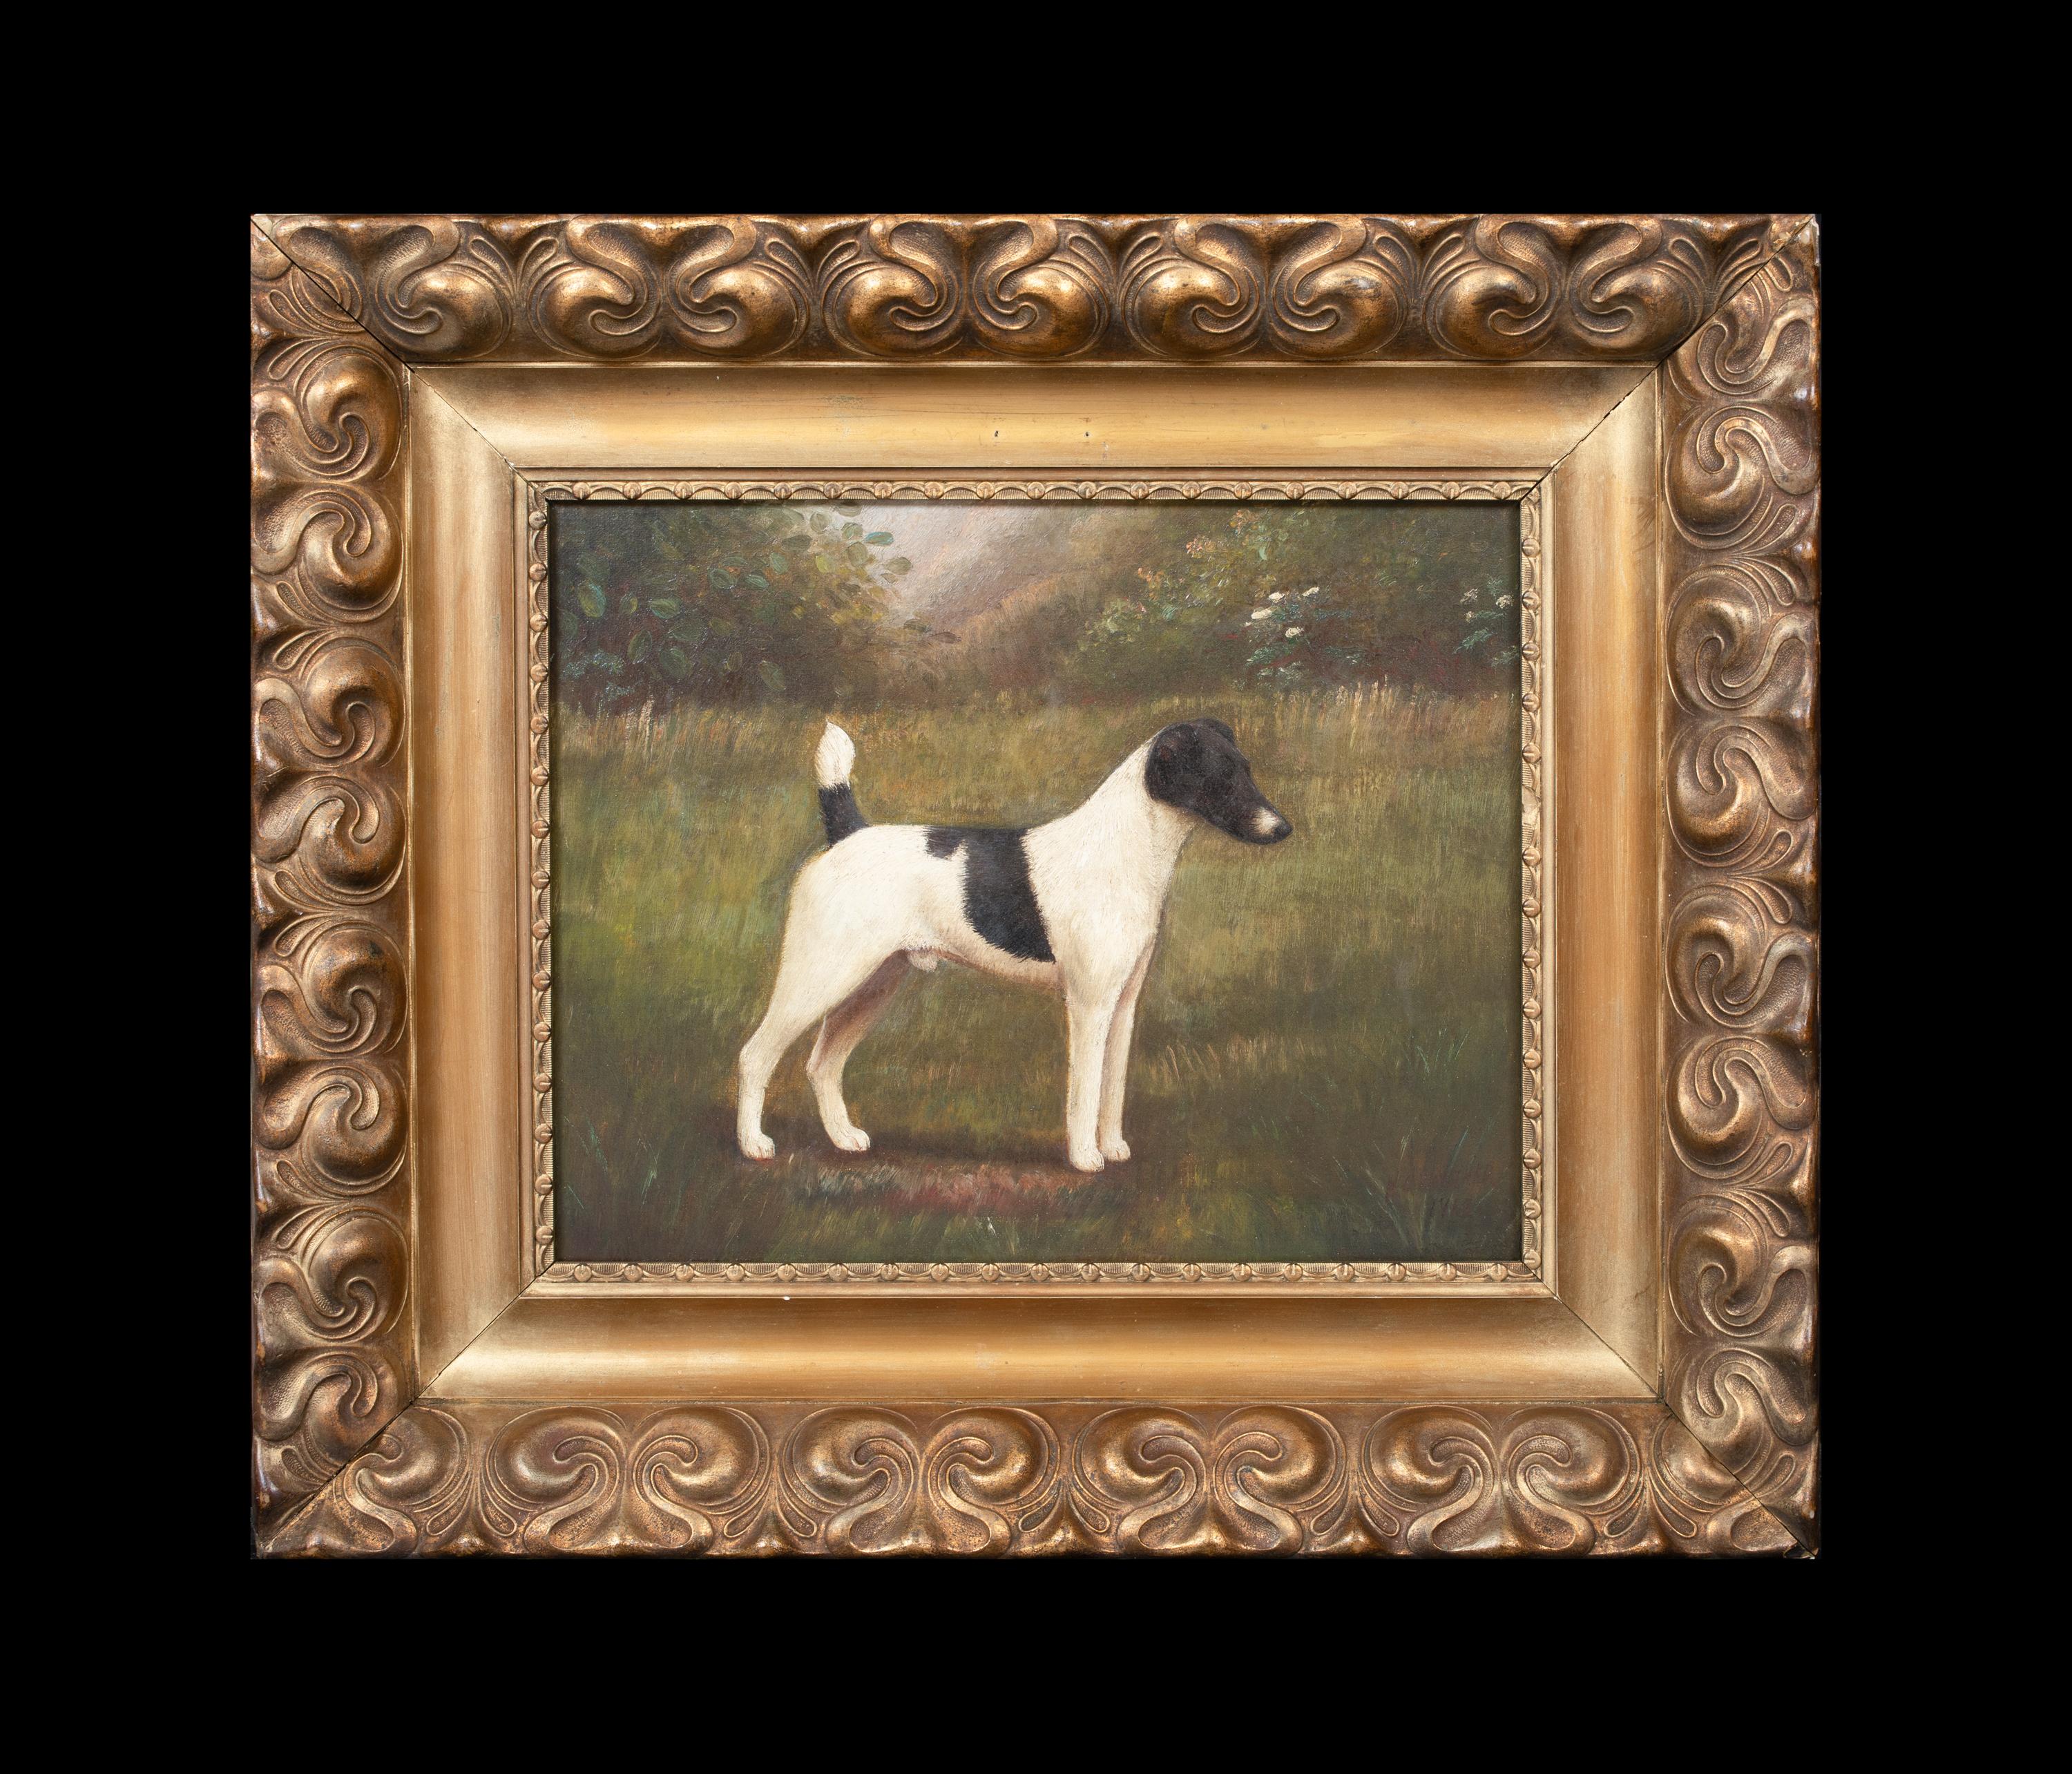  Portrait Of A Black & White Jack Russell Terrier, 19th Century HENRY CROWTHER - Painting by Unknown